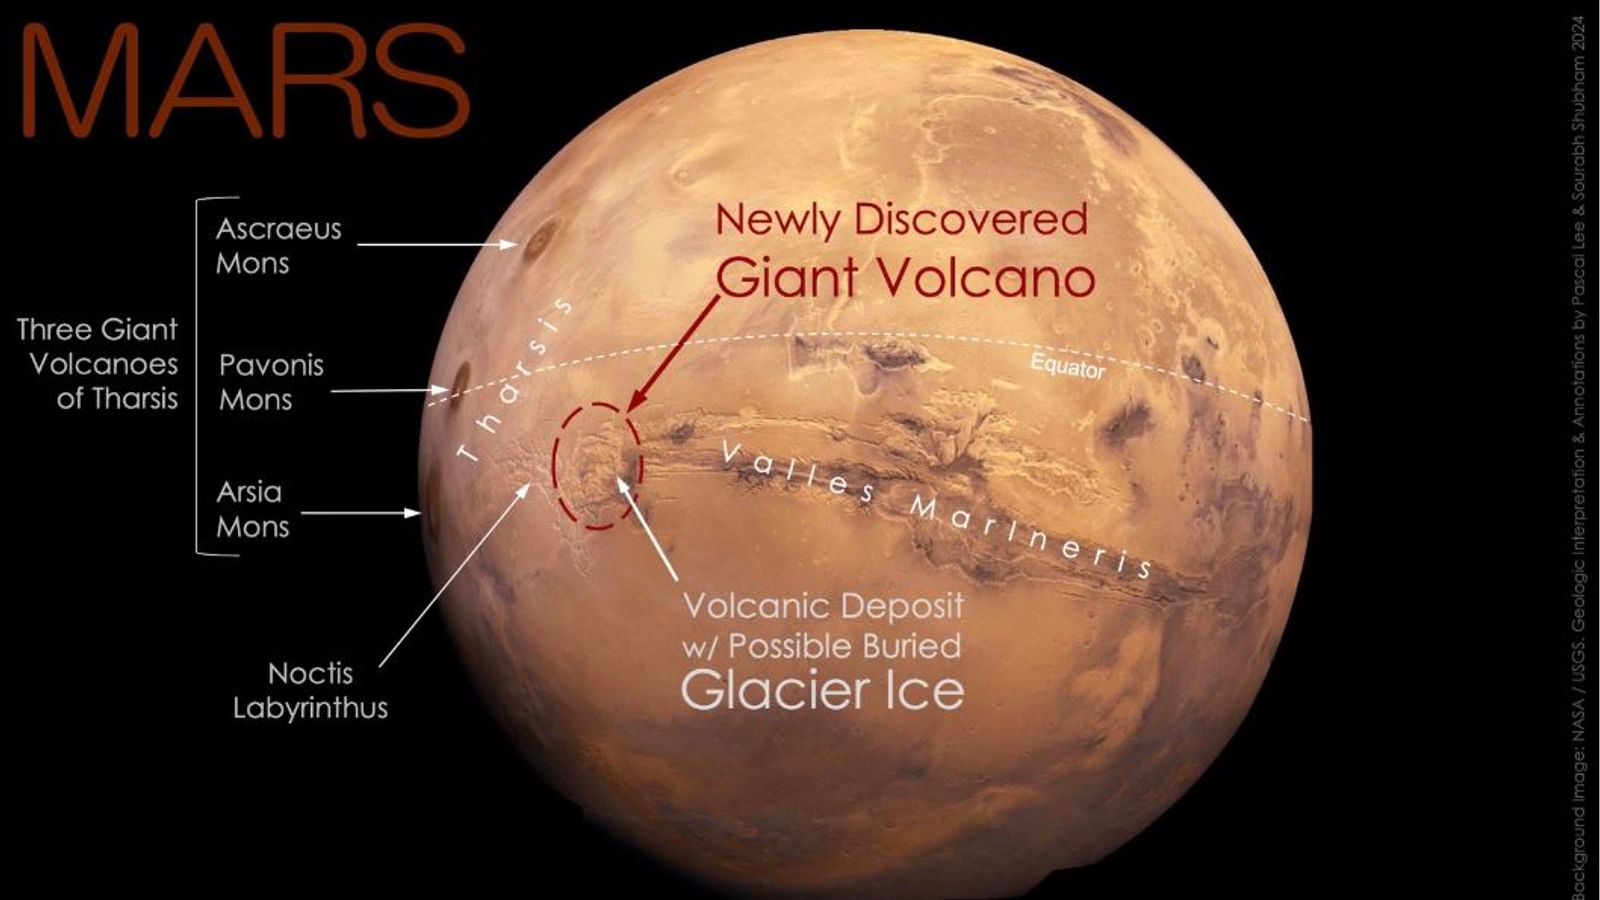 Discovering a Giant Volcano on Mars: A Step Towards Understanding Its Geologic Evolution and Searching for Life